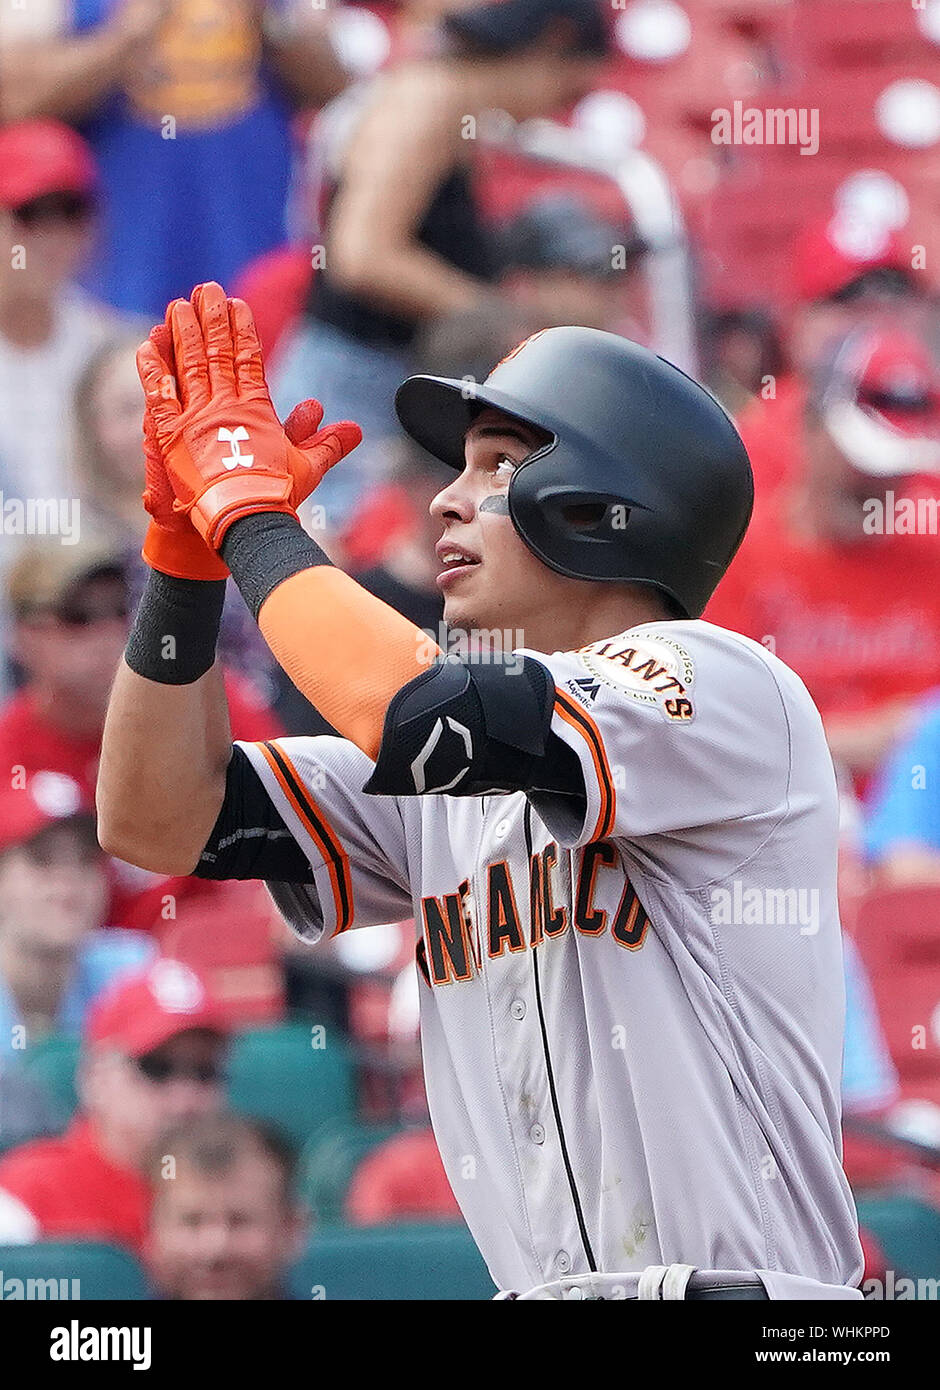 St. Louis, United States. 02nd Sep, 2019. San Francisco Giants Mauricio Dubon claps his hands as he touches home plate, hitting a solo home run in the eighth inning against the St. Louis Cardinals at Busch Stadium on Monday, September 2, 2019. St. Louis defeated San Francisco, 3-1. Photo by Bill Greenblatt/UPI Credit: UPI/Alamy Live News Stock Photo